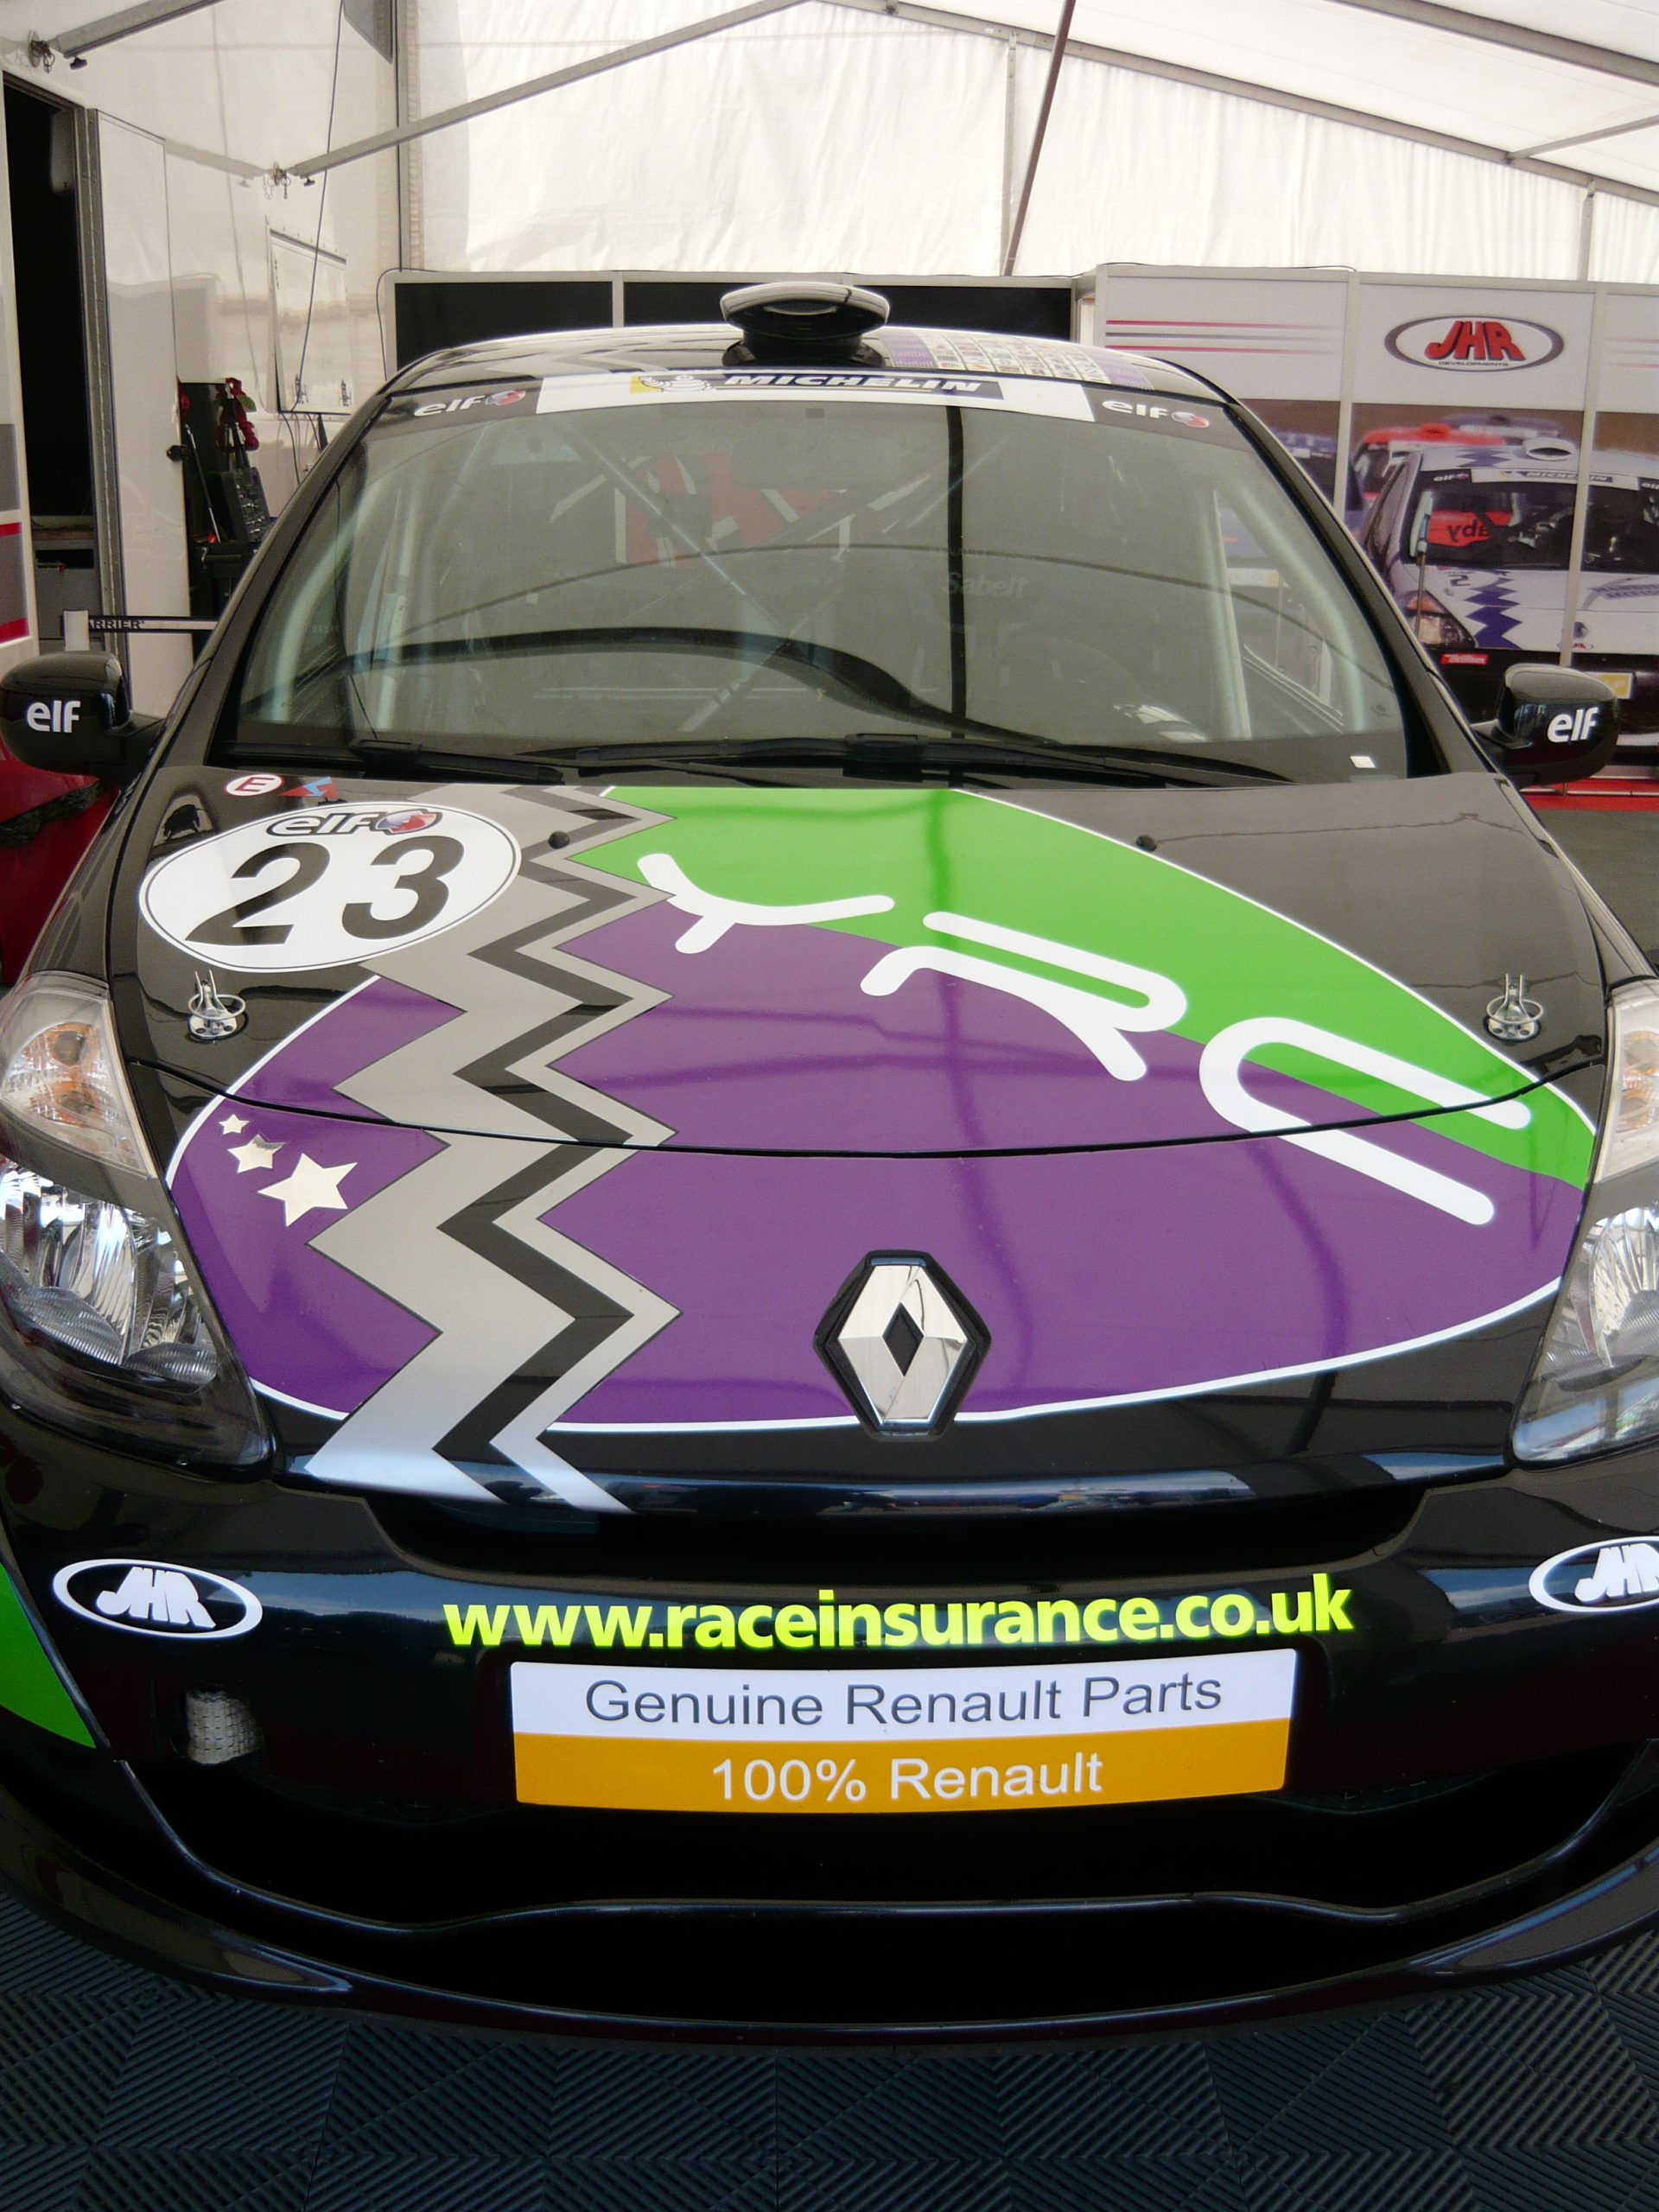 The YRC car in the garage at Rockingham (Pic: Onlineability)